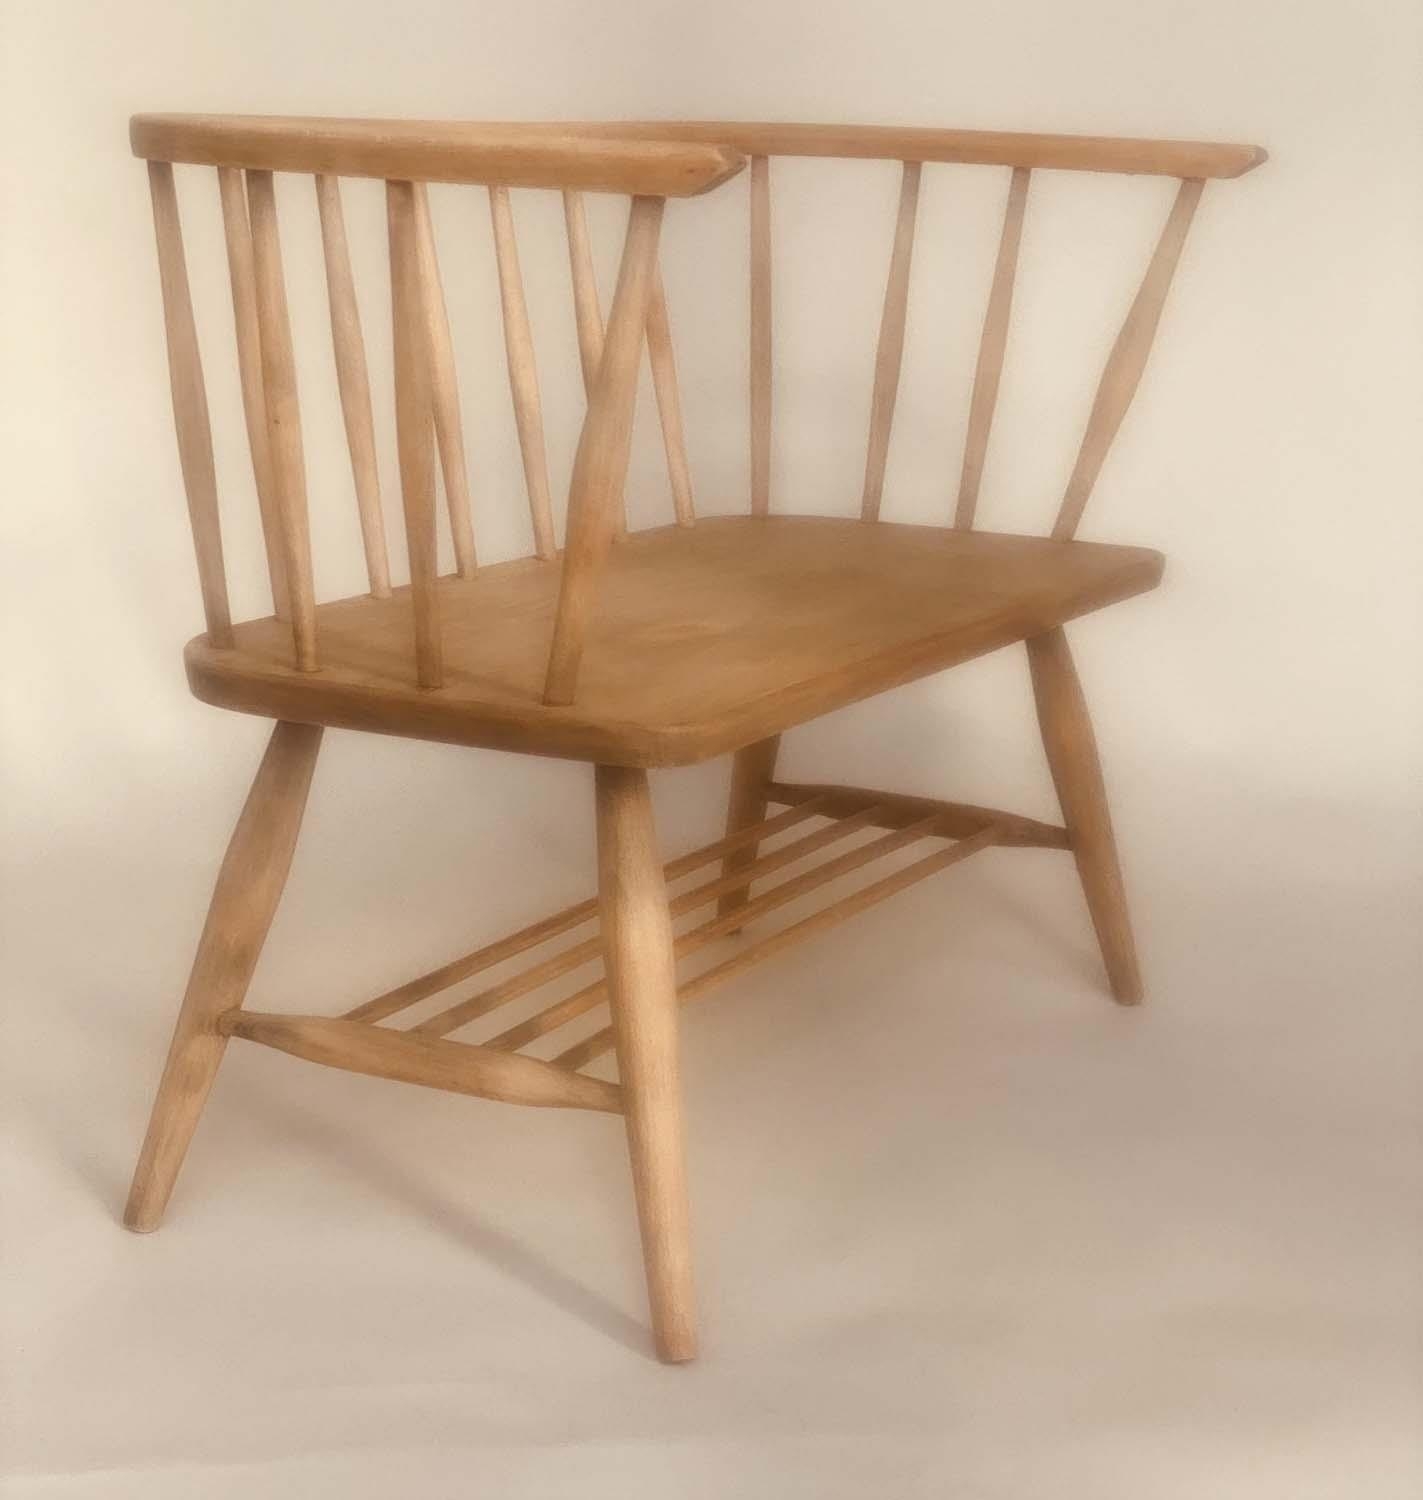 ERCOL STYLE HALL SEAT, mid 20th century elm, with enclosing rail back and solid seat in the manner - Image 3 of 6